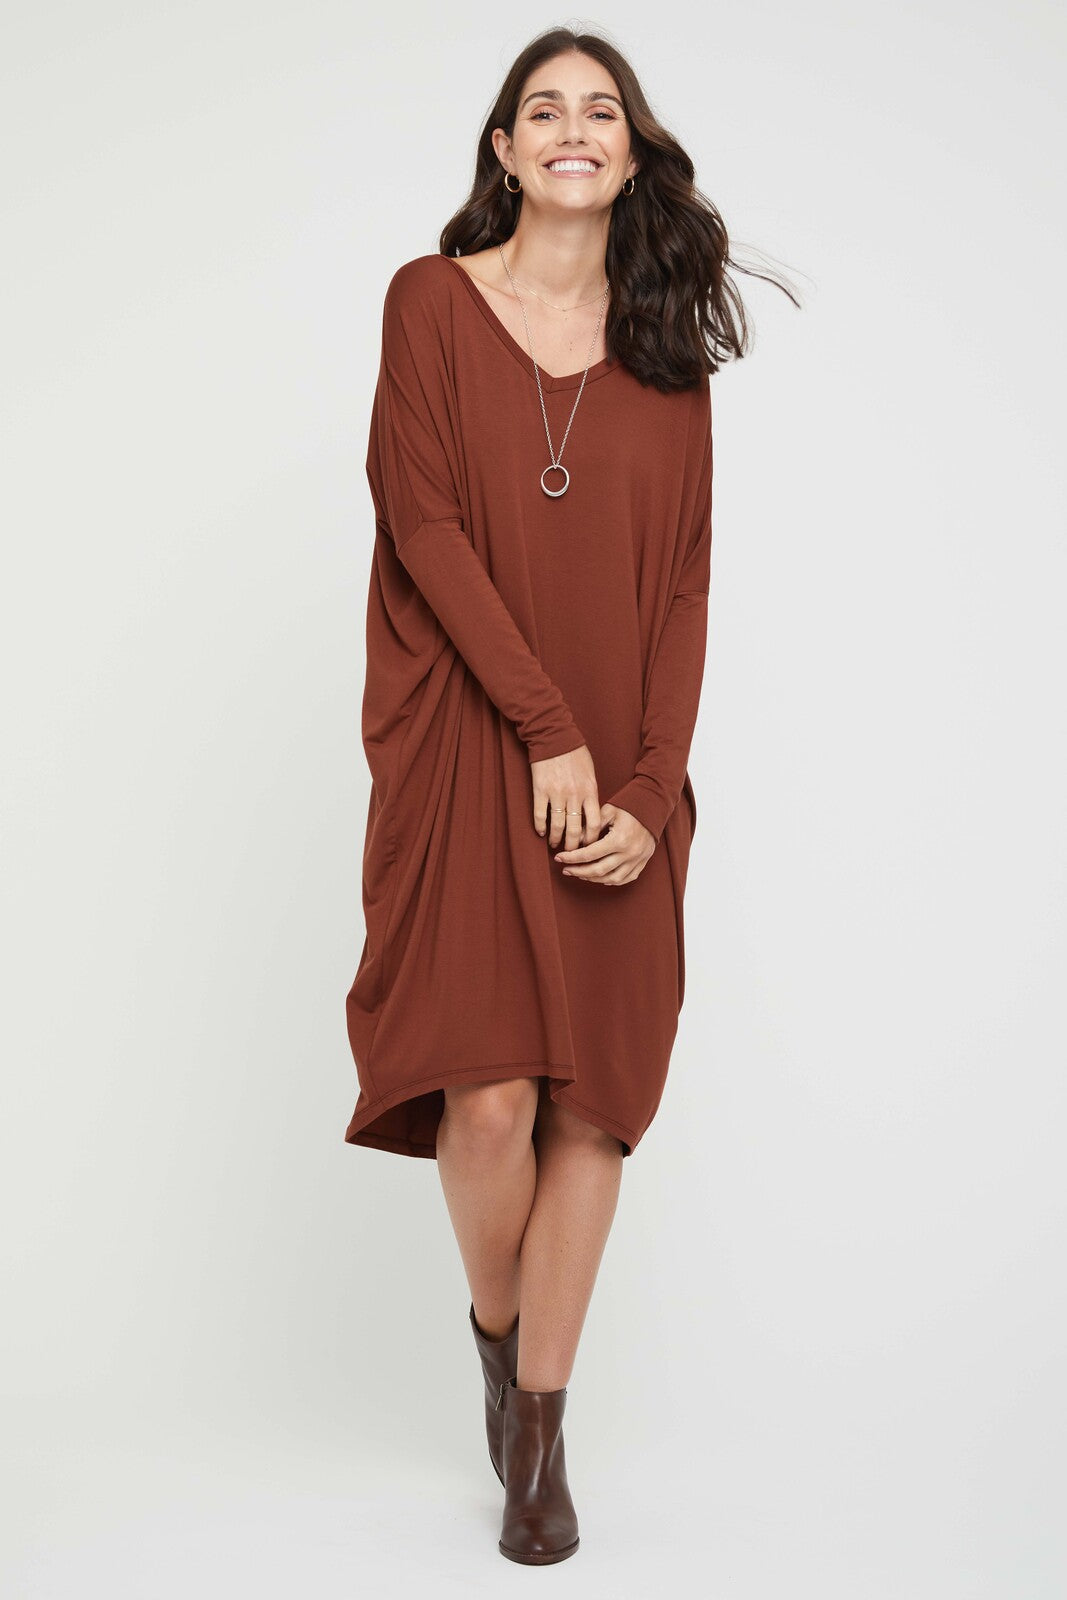 Catherine Dress in Smoked Paprika by Bamboo Body